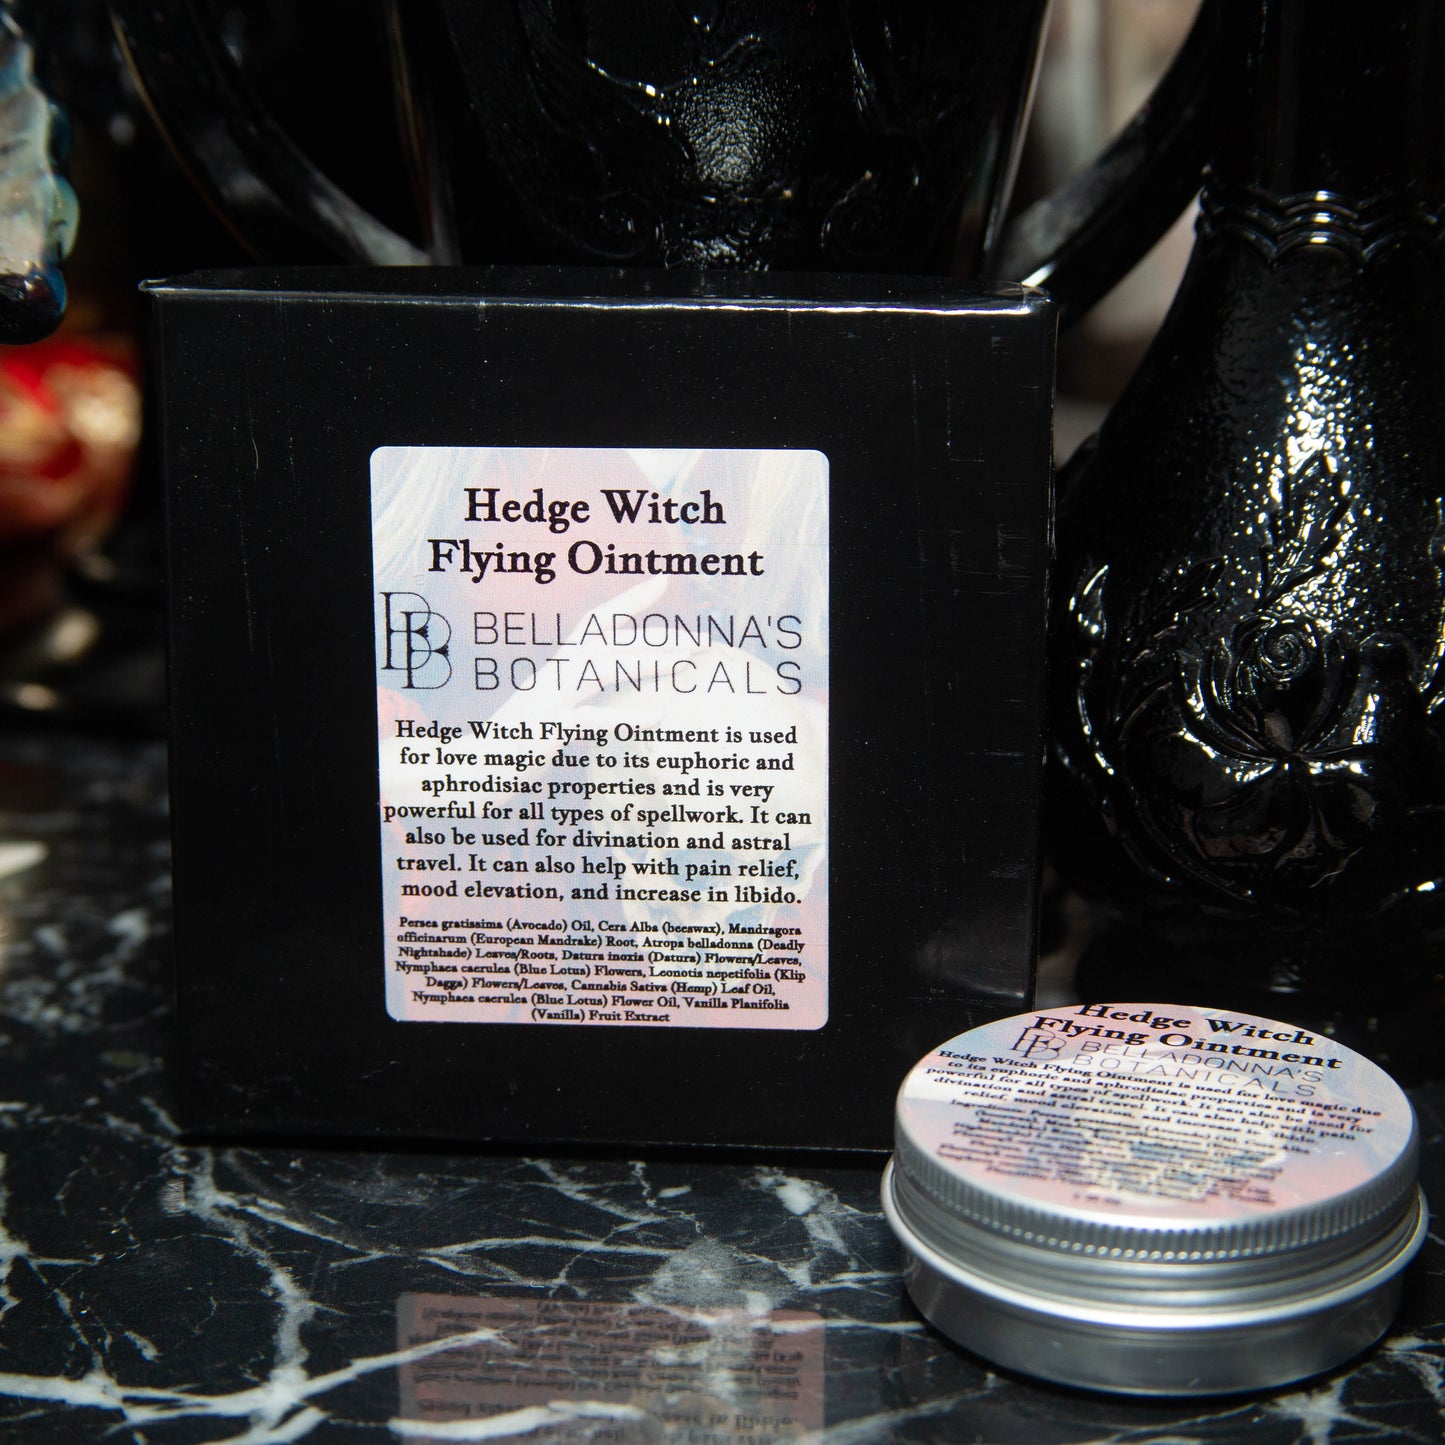 Hedge Witch Flying Ointment